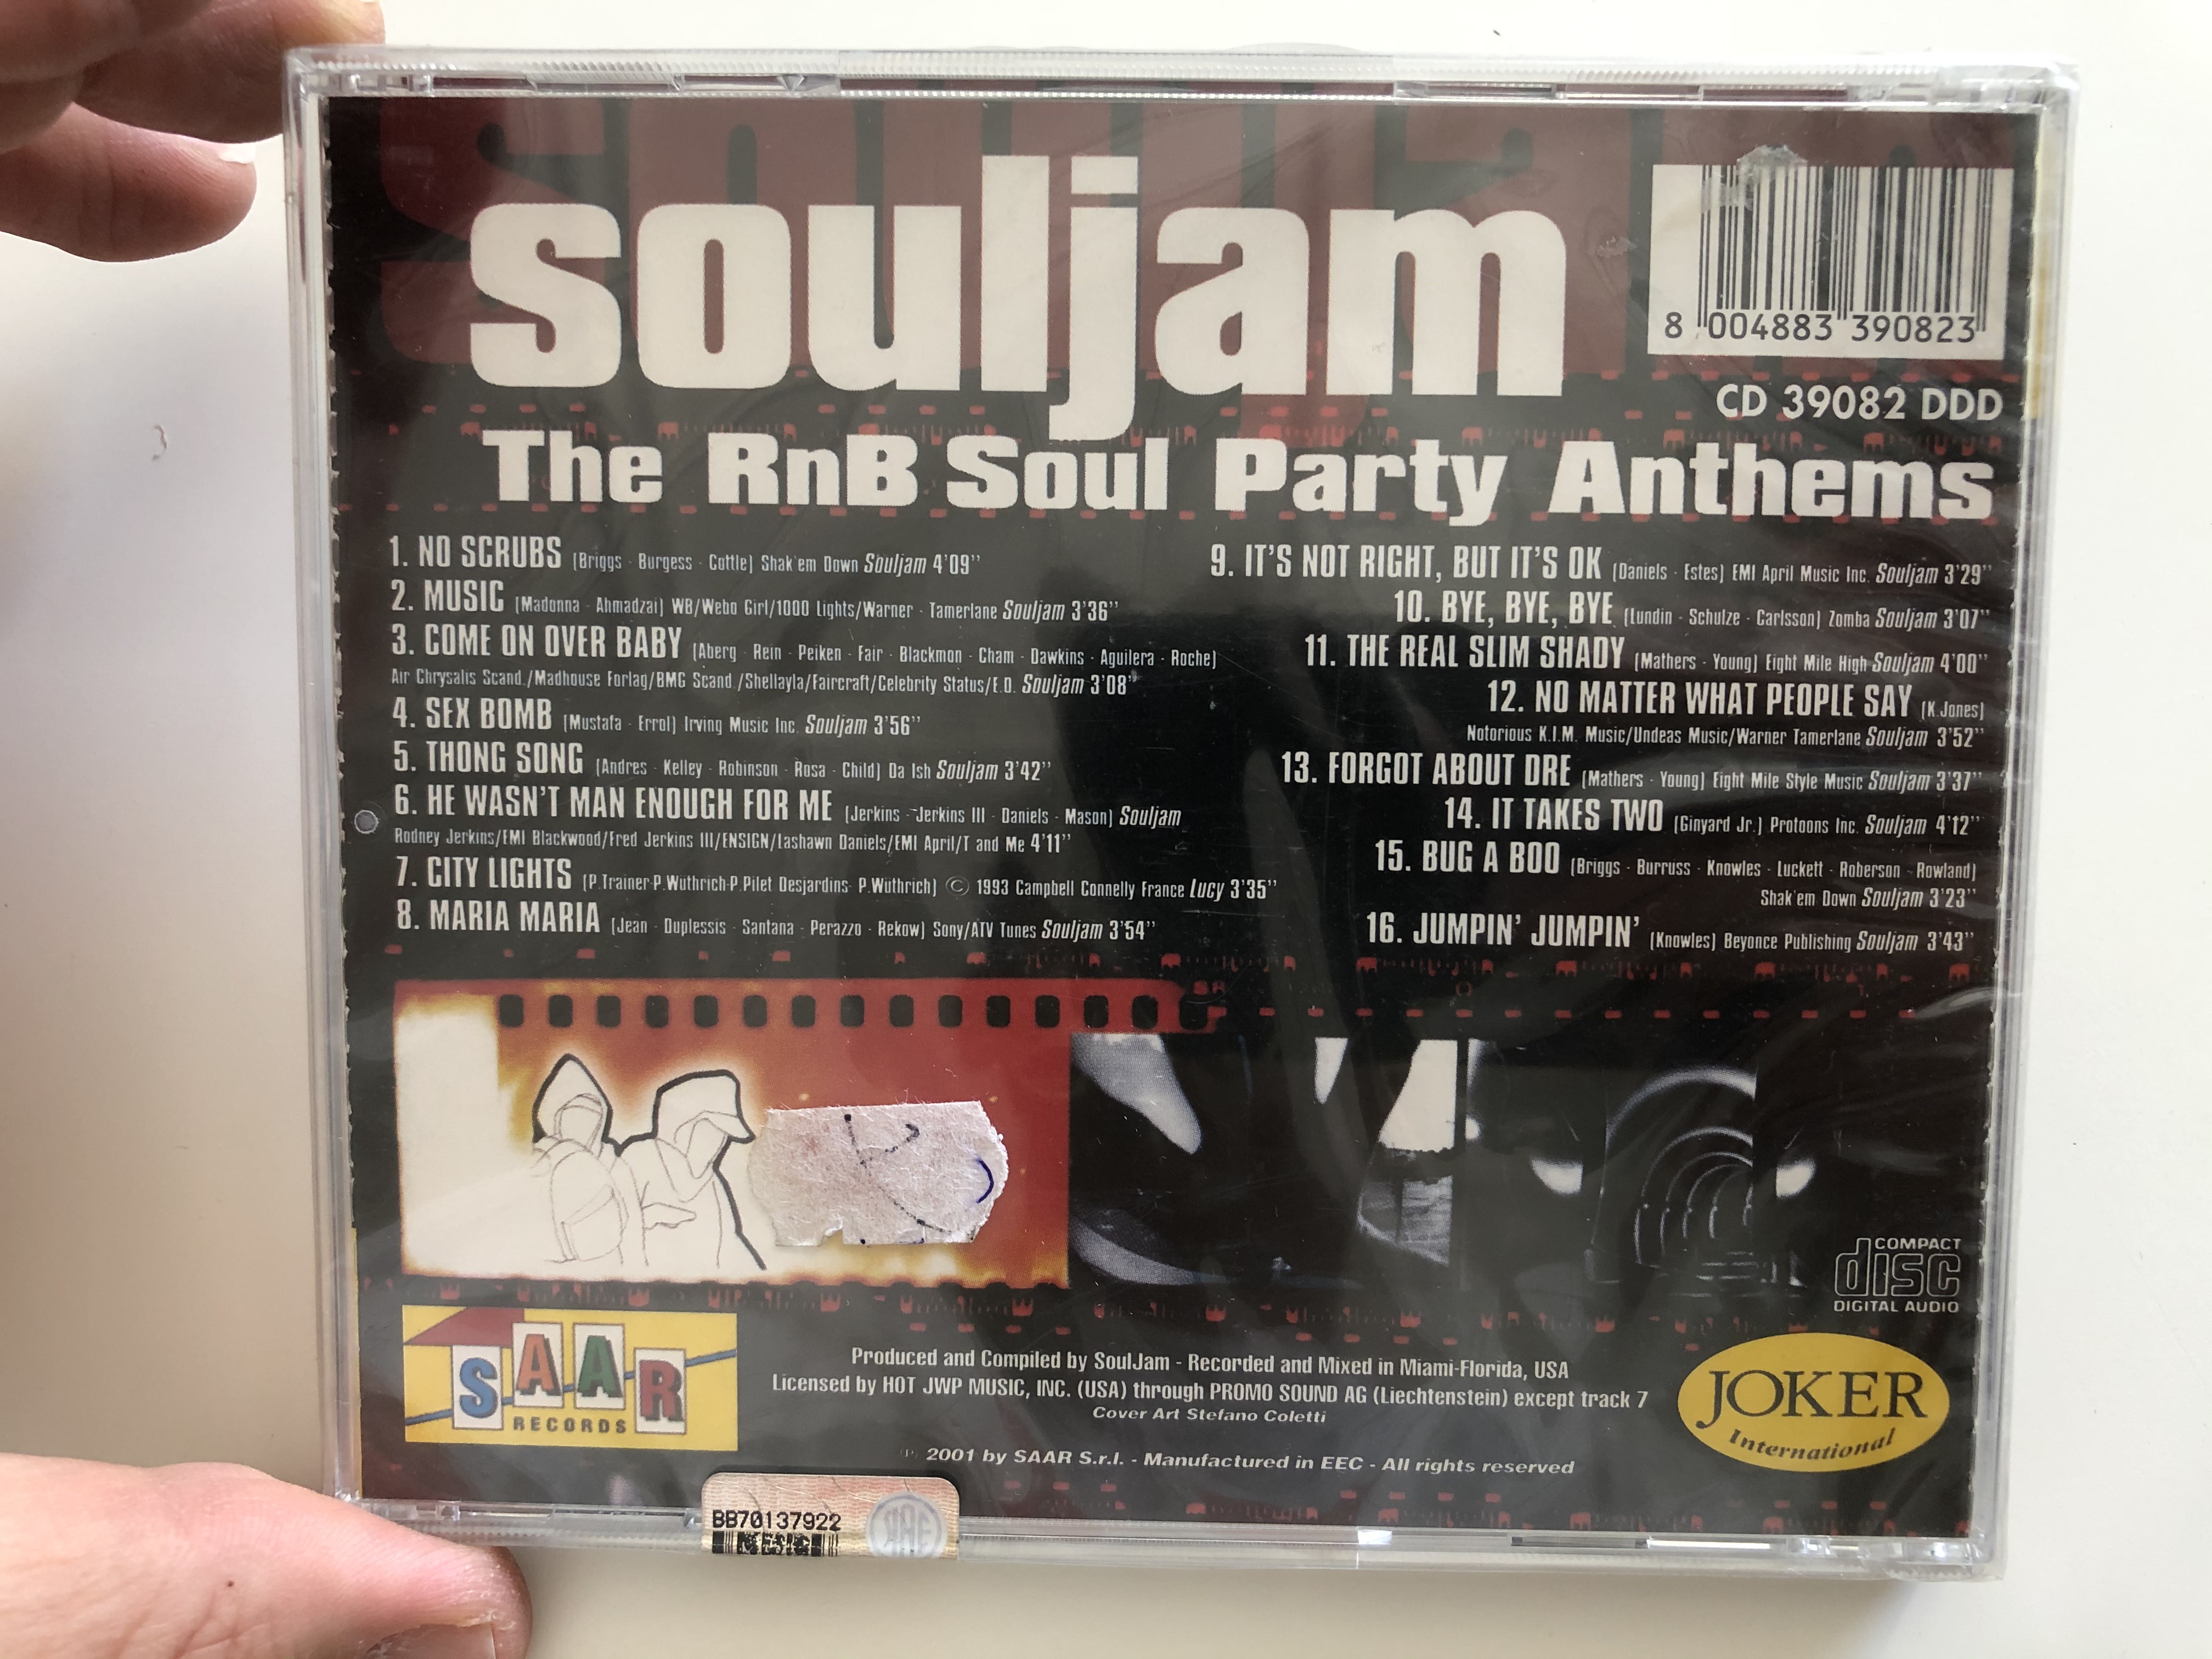 souljam-3-the-rnb-soul-party-anthems-no-scrubs-come-on-over-baby-thong-song-city-lights-maria-maria-it-s-not-right-but-it-s-oke-bye-bye-bye-forgot-about-dre-bug-a-boo-jumpin-jumpin-.jpg